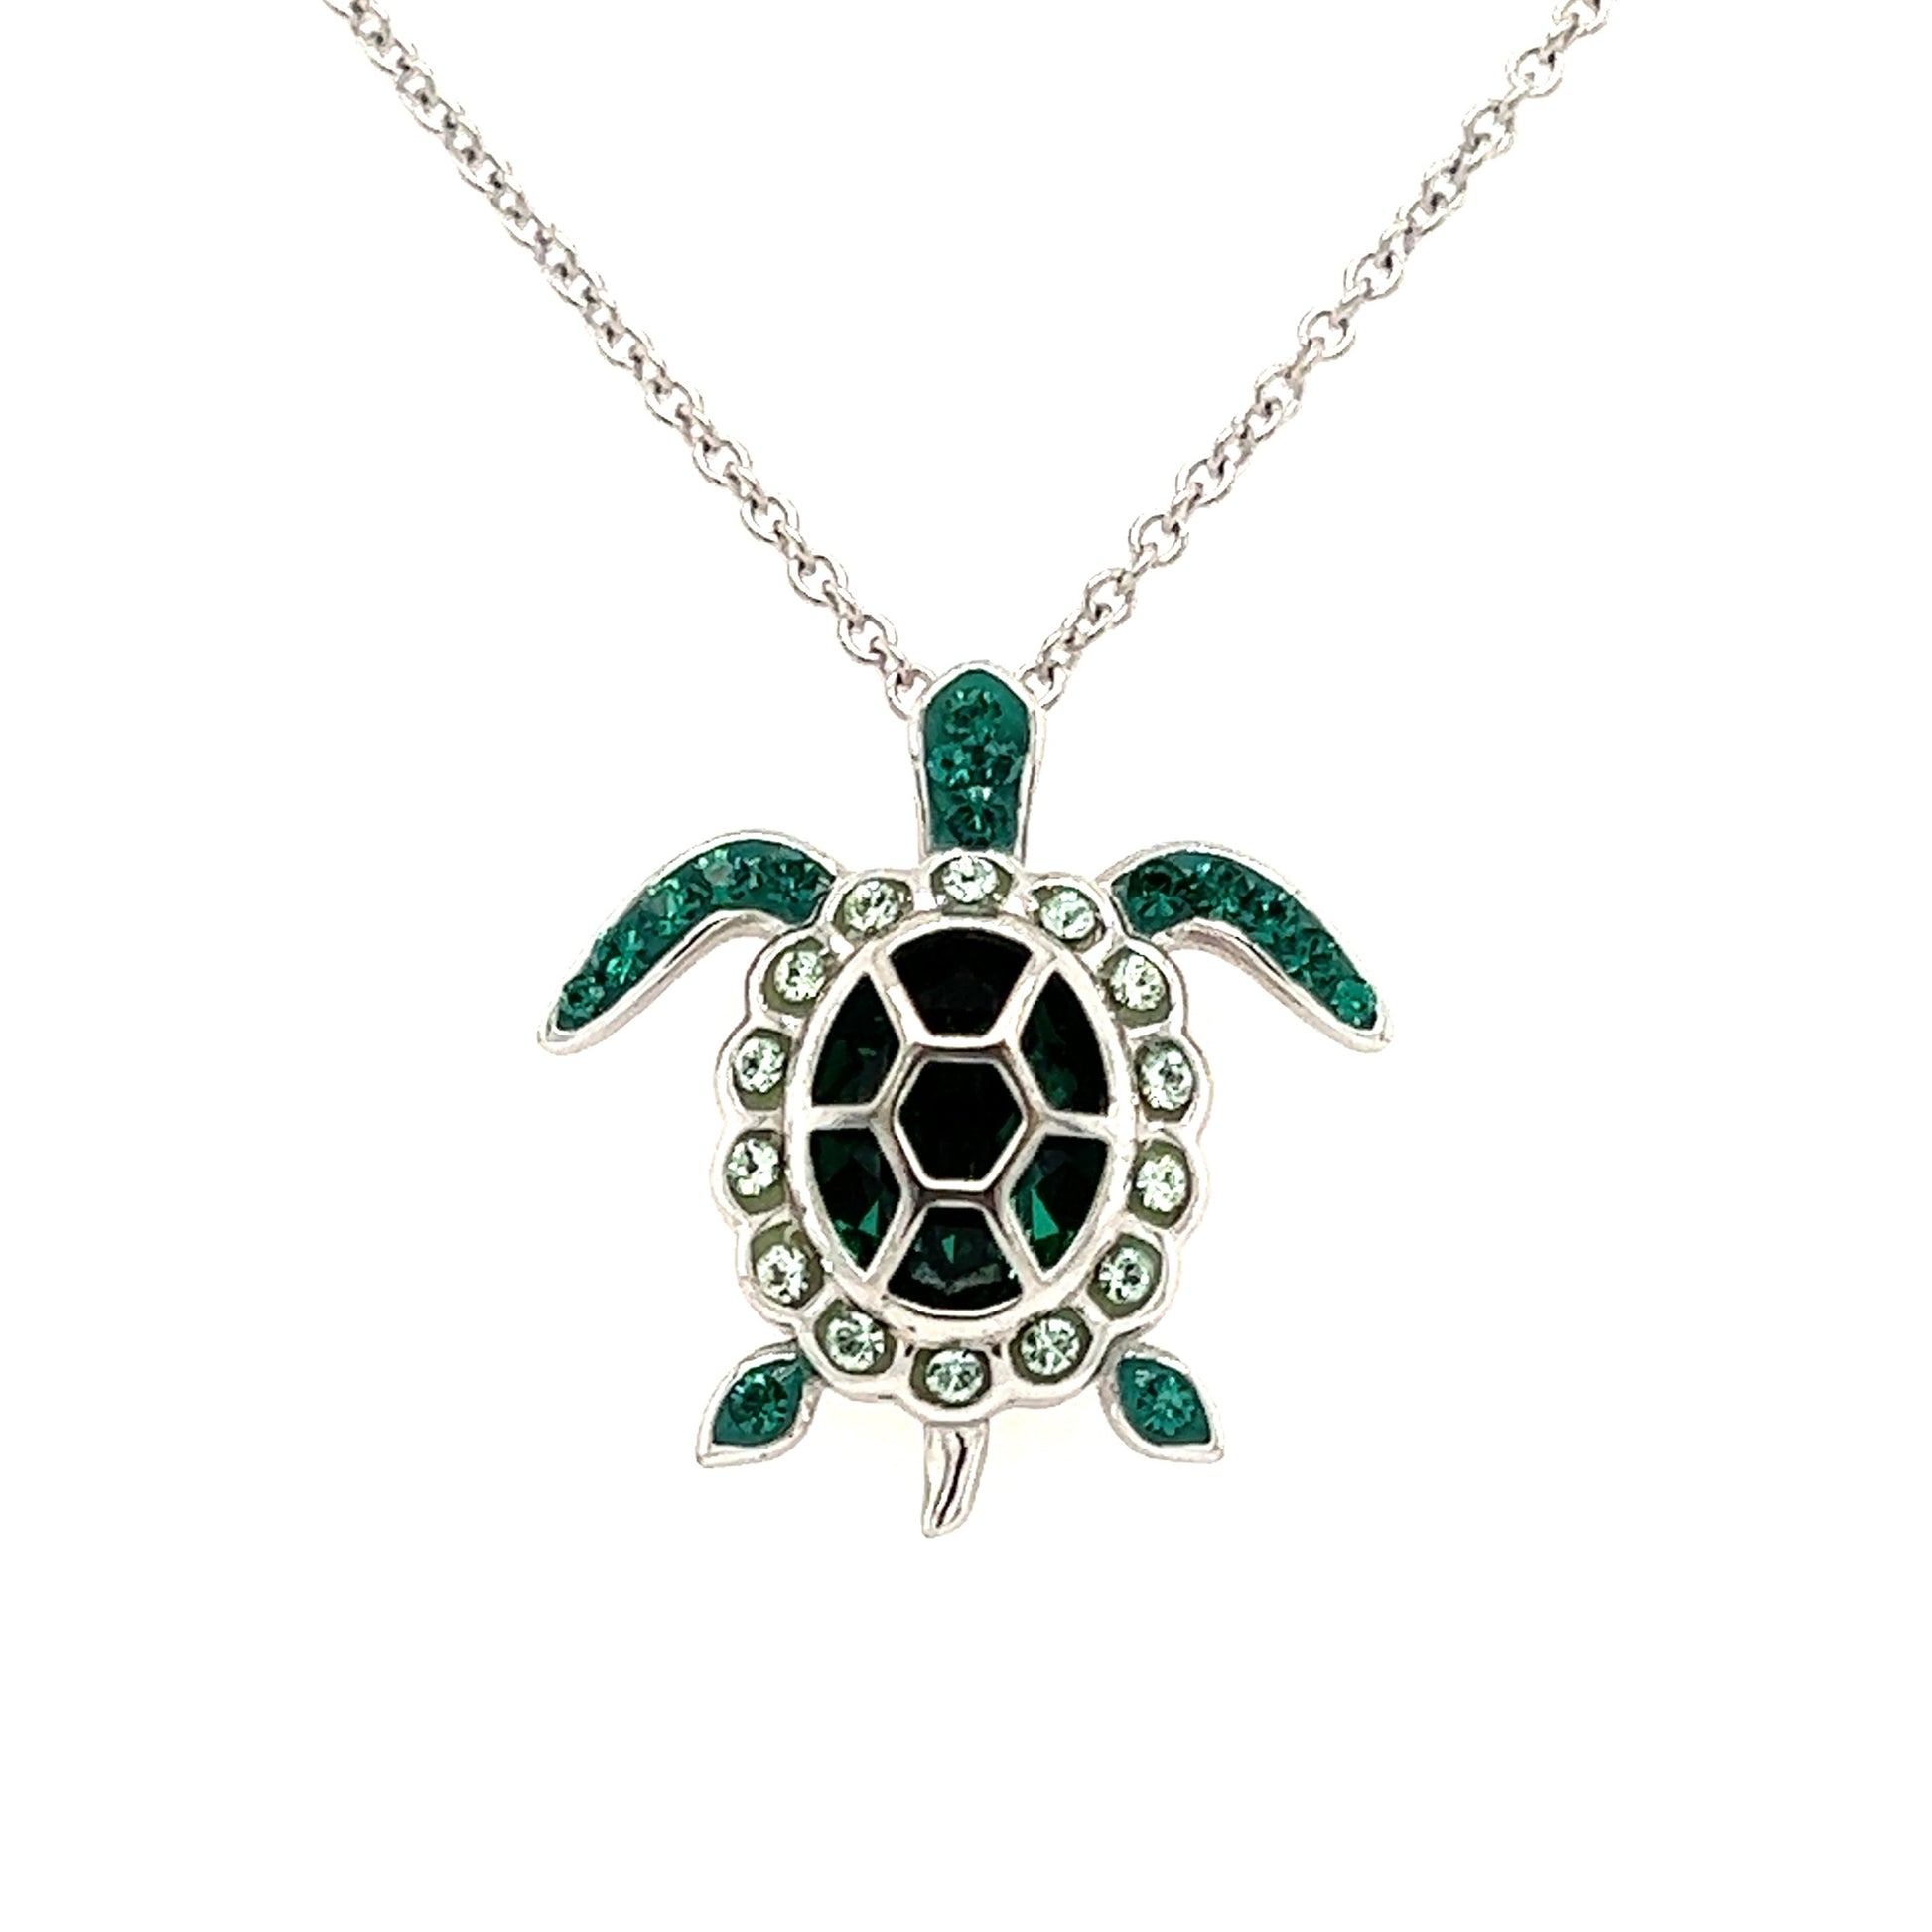 Sea Turtle Necklace with Deep Green Crystals in Sterling Silver Front View